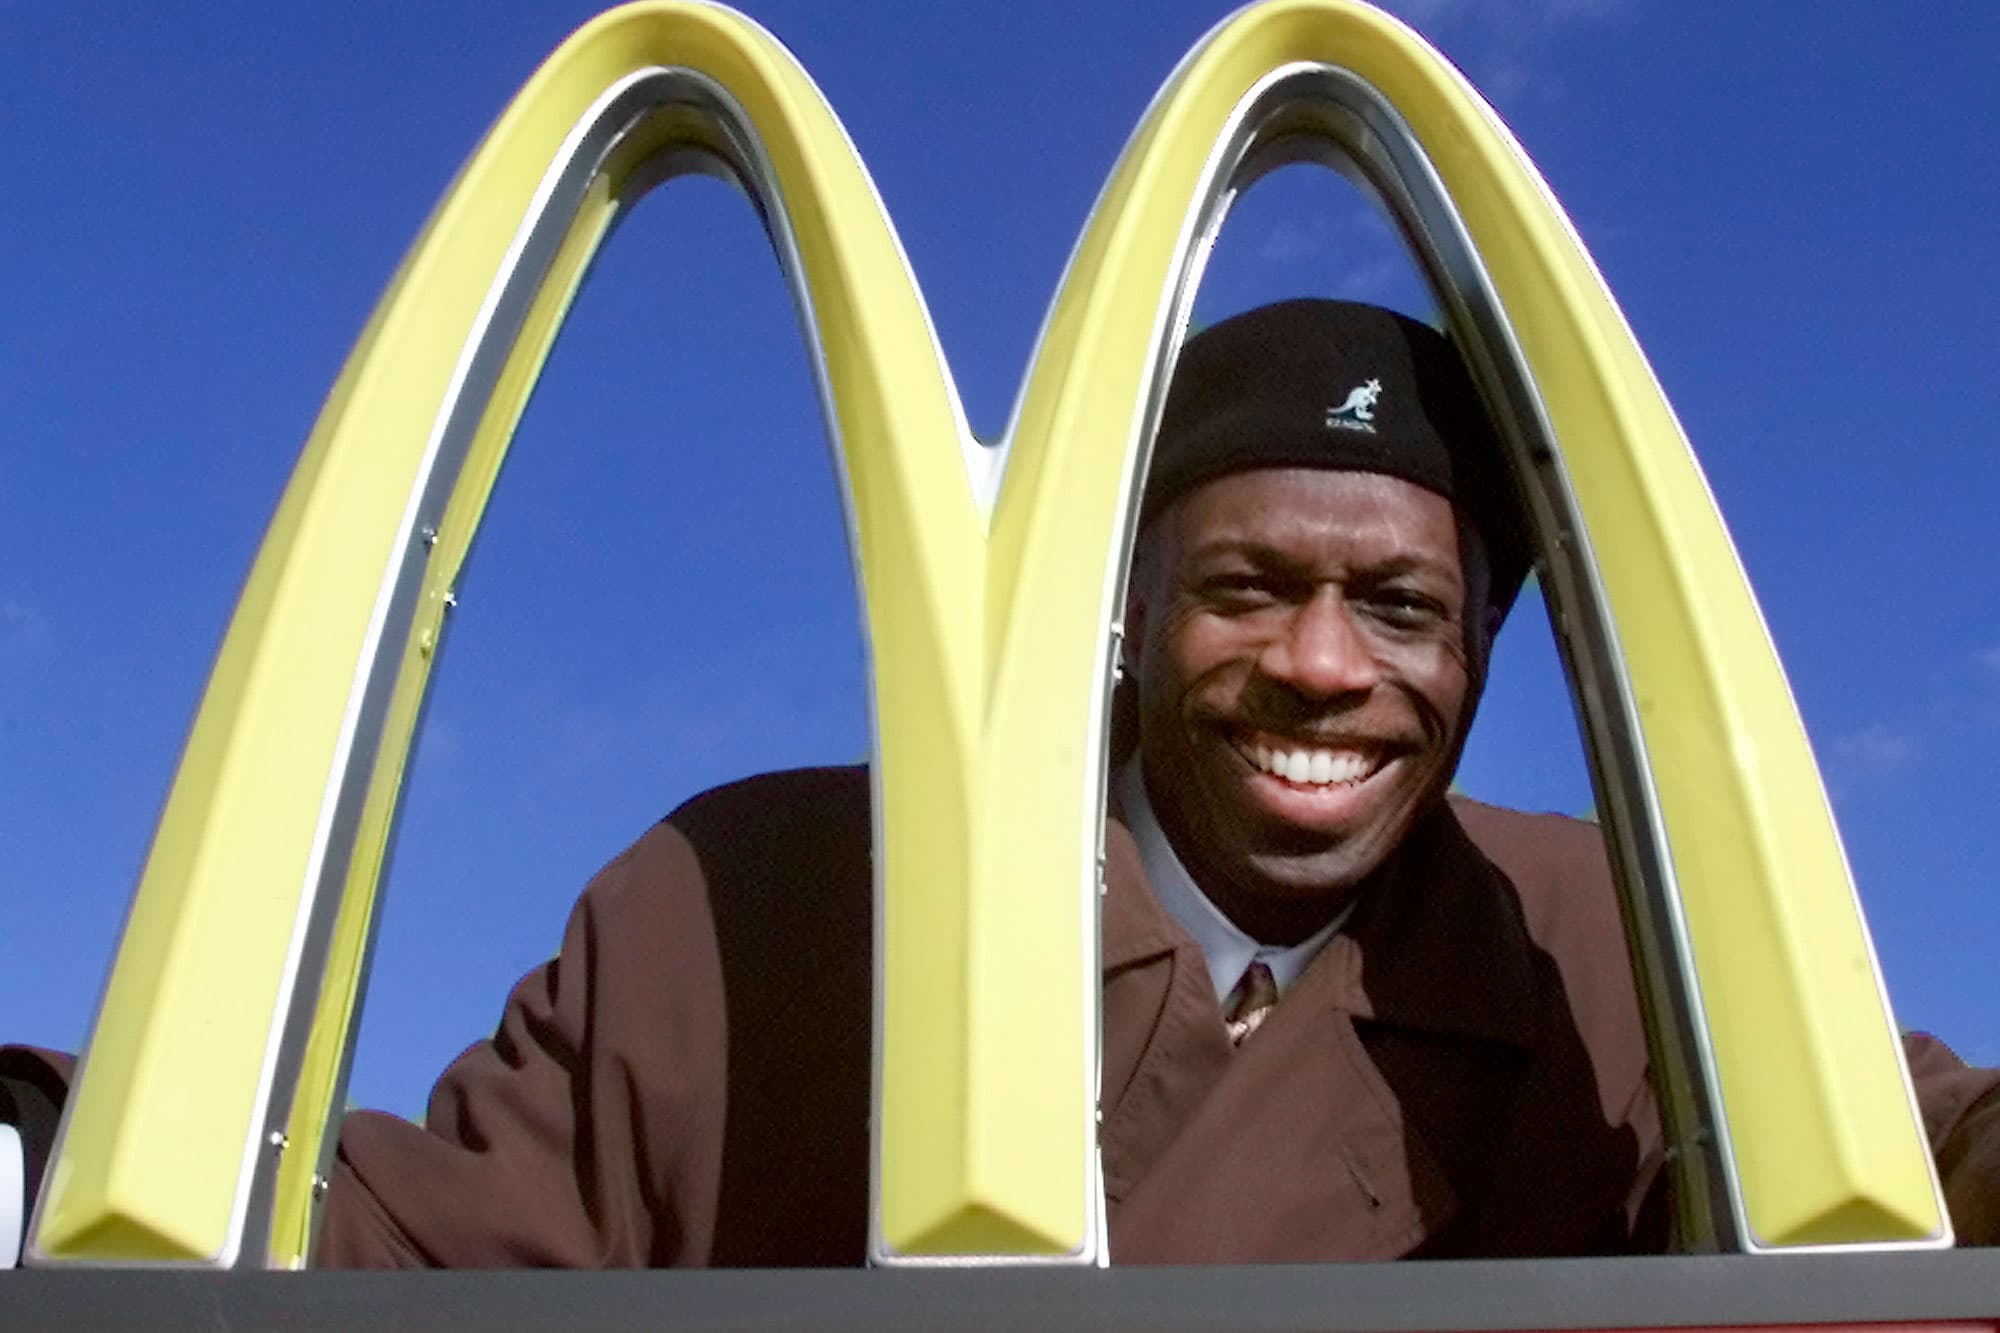 McDonald’s Settles Racial Discrimination Lawsuit with Former Baseball Player and Franchisee Herb Washington